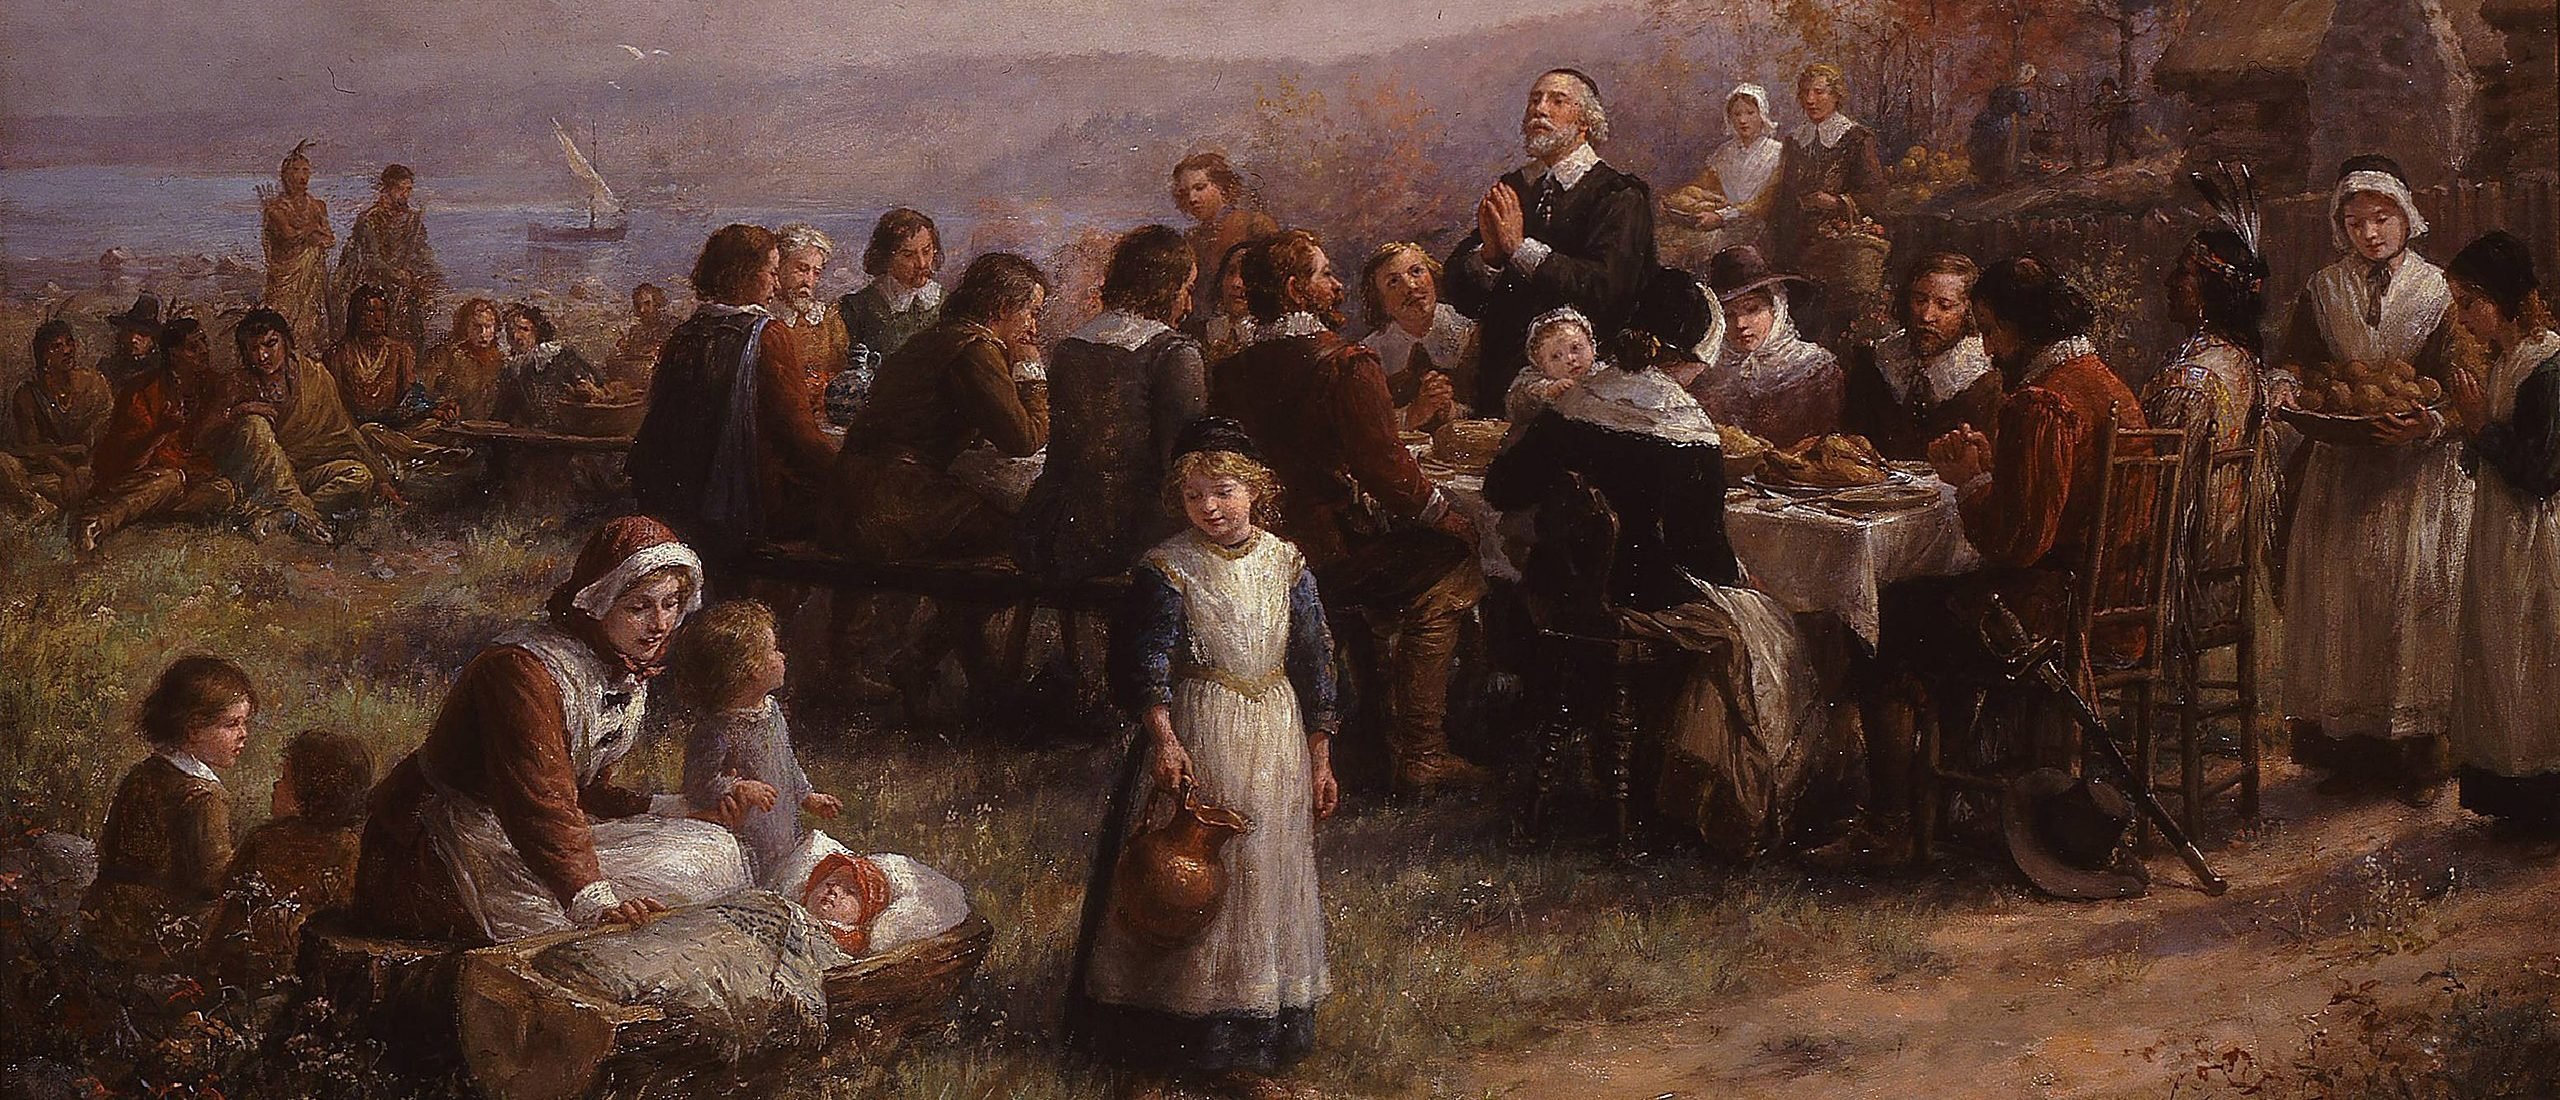 BARTH: Rediscovering The True Meaning of Thanksgiving In A Secular America